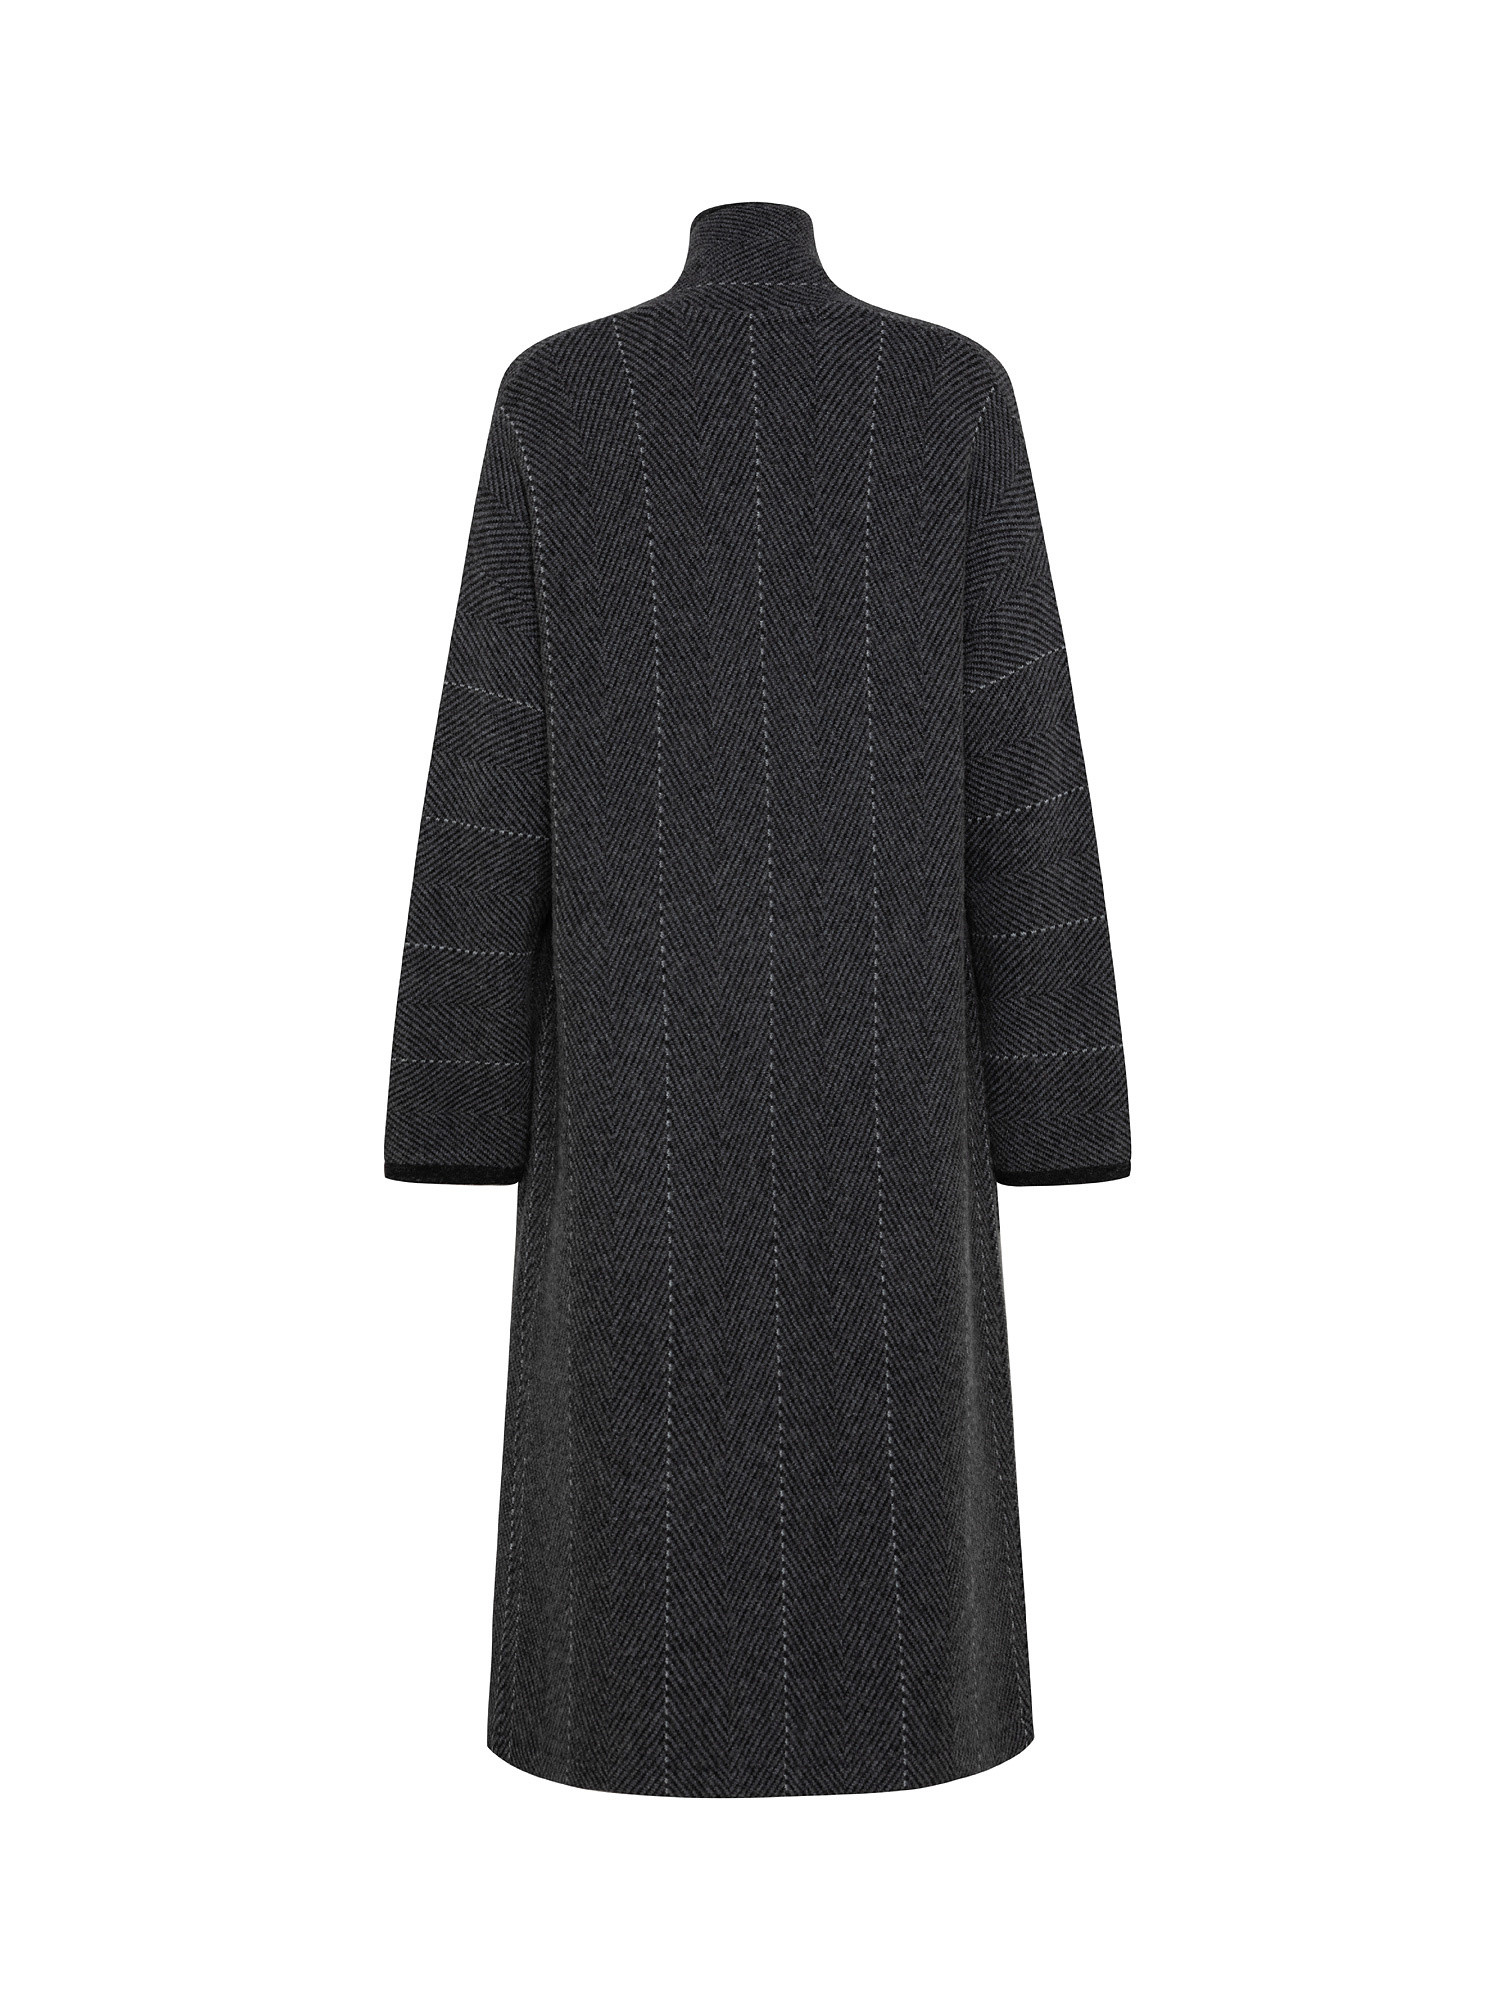 Knitted coat, Grey, large image number 1